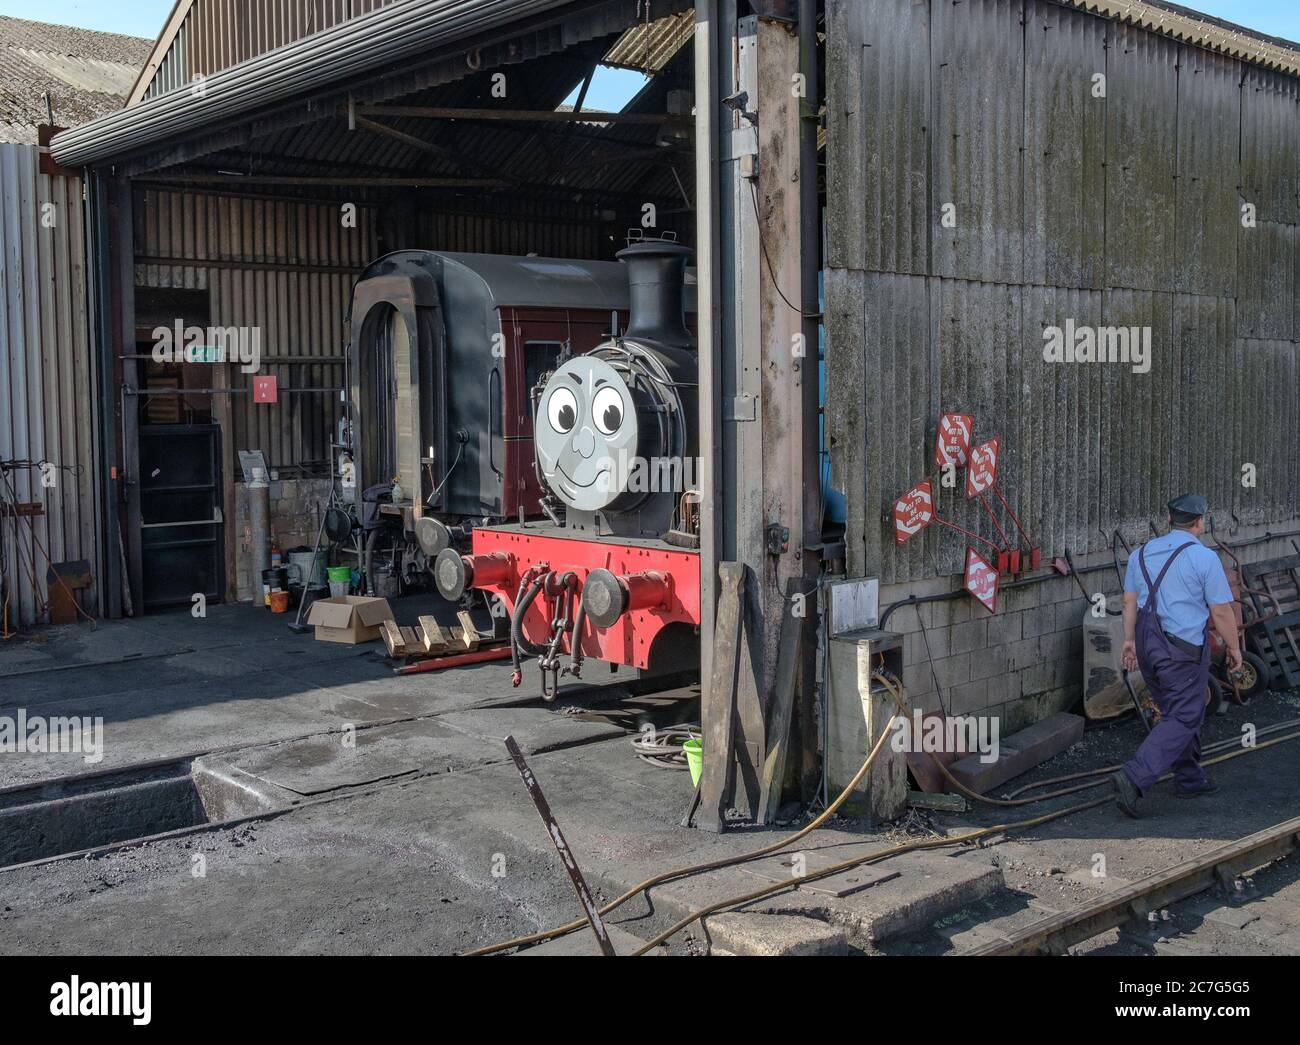 Vintage styled steam locomotives including a popular children's character train seen in a locomotive shed with a train driver seen walking past. Stock Photo